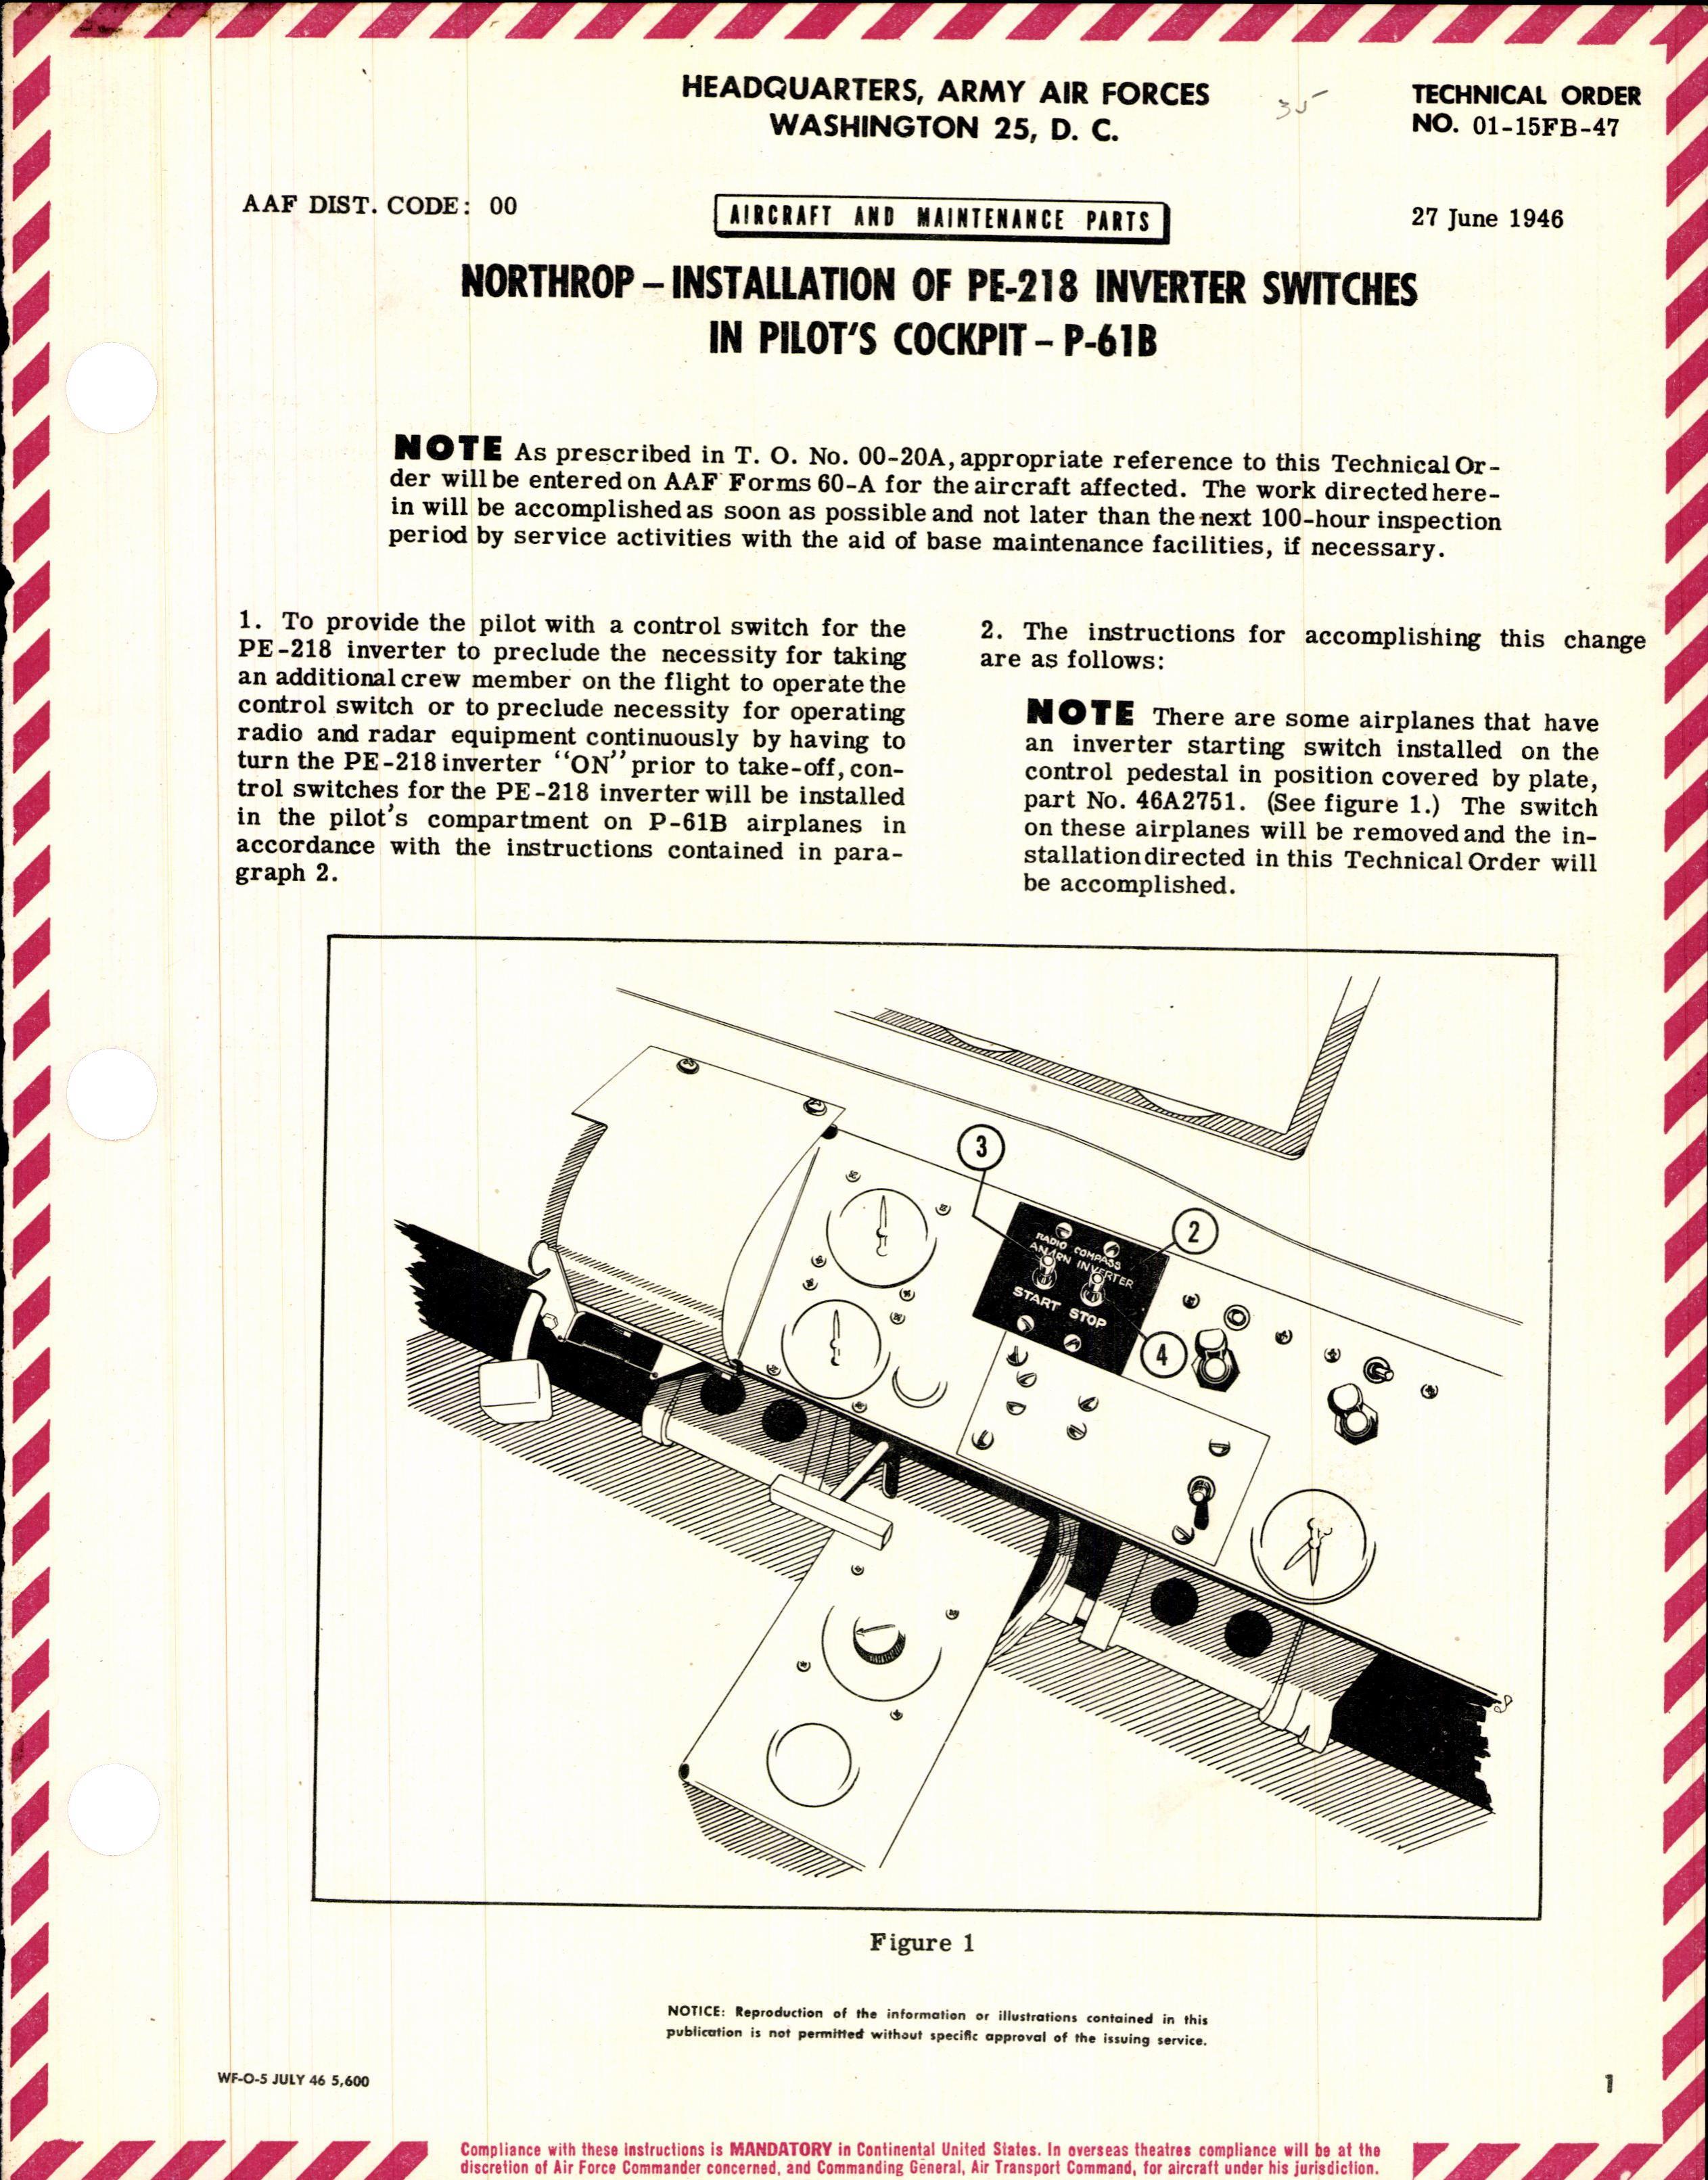 Sample page 1 from AirCorps Library document: Installation of PE-218 Inverter Switches in Pilot's Cockpit for P-61B